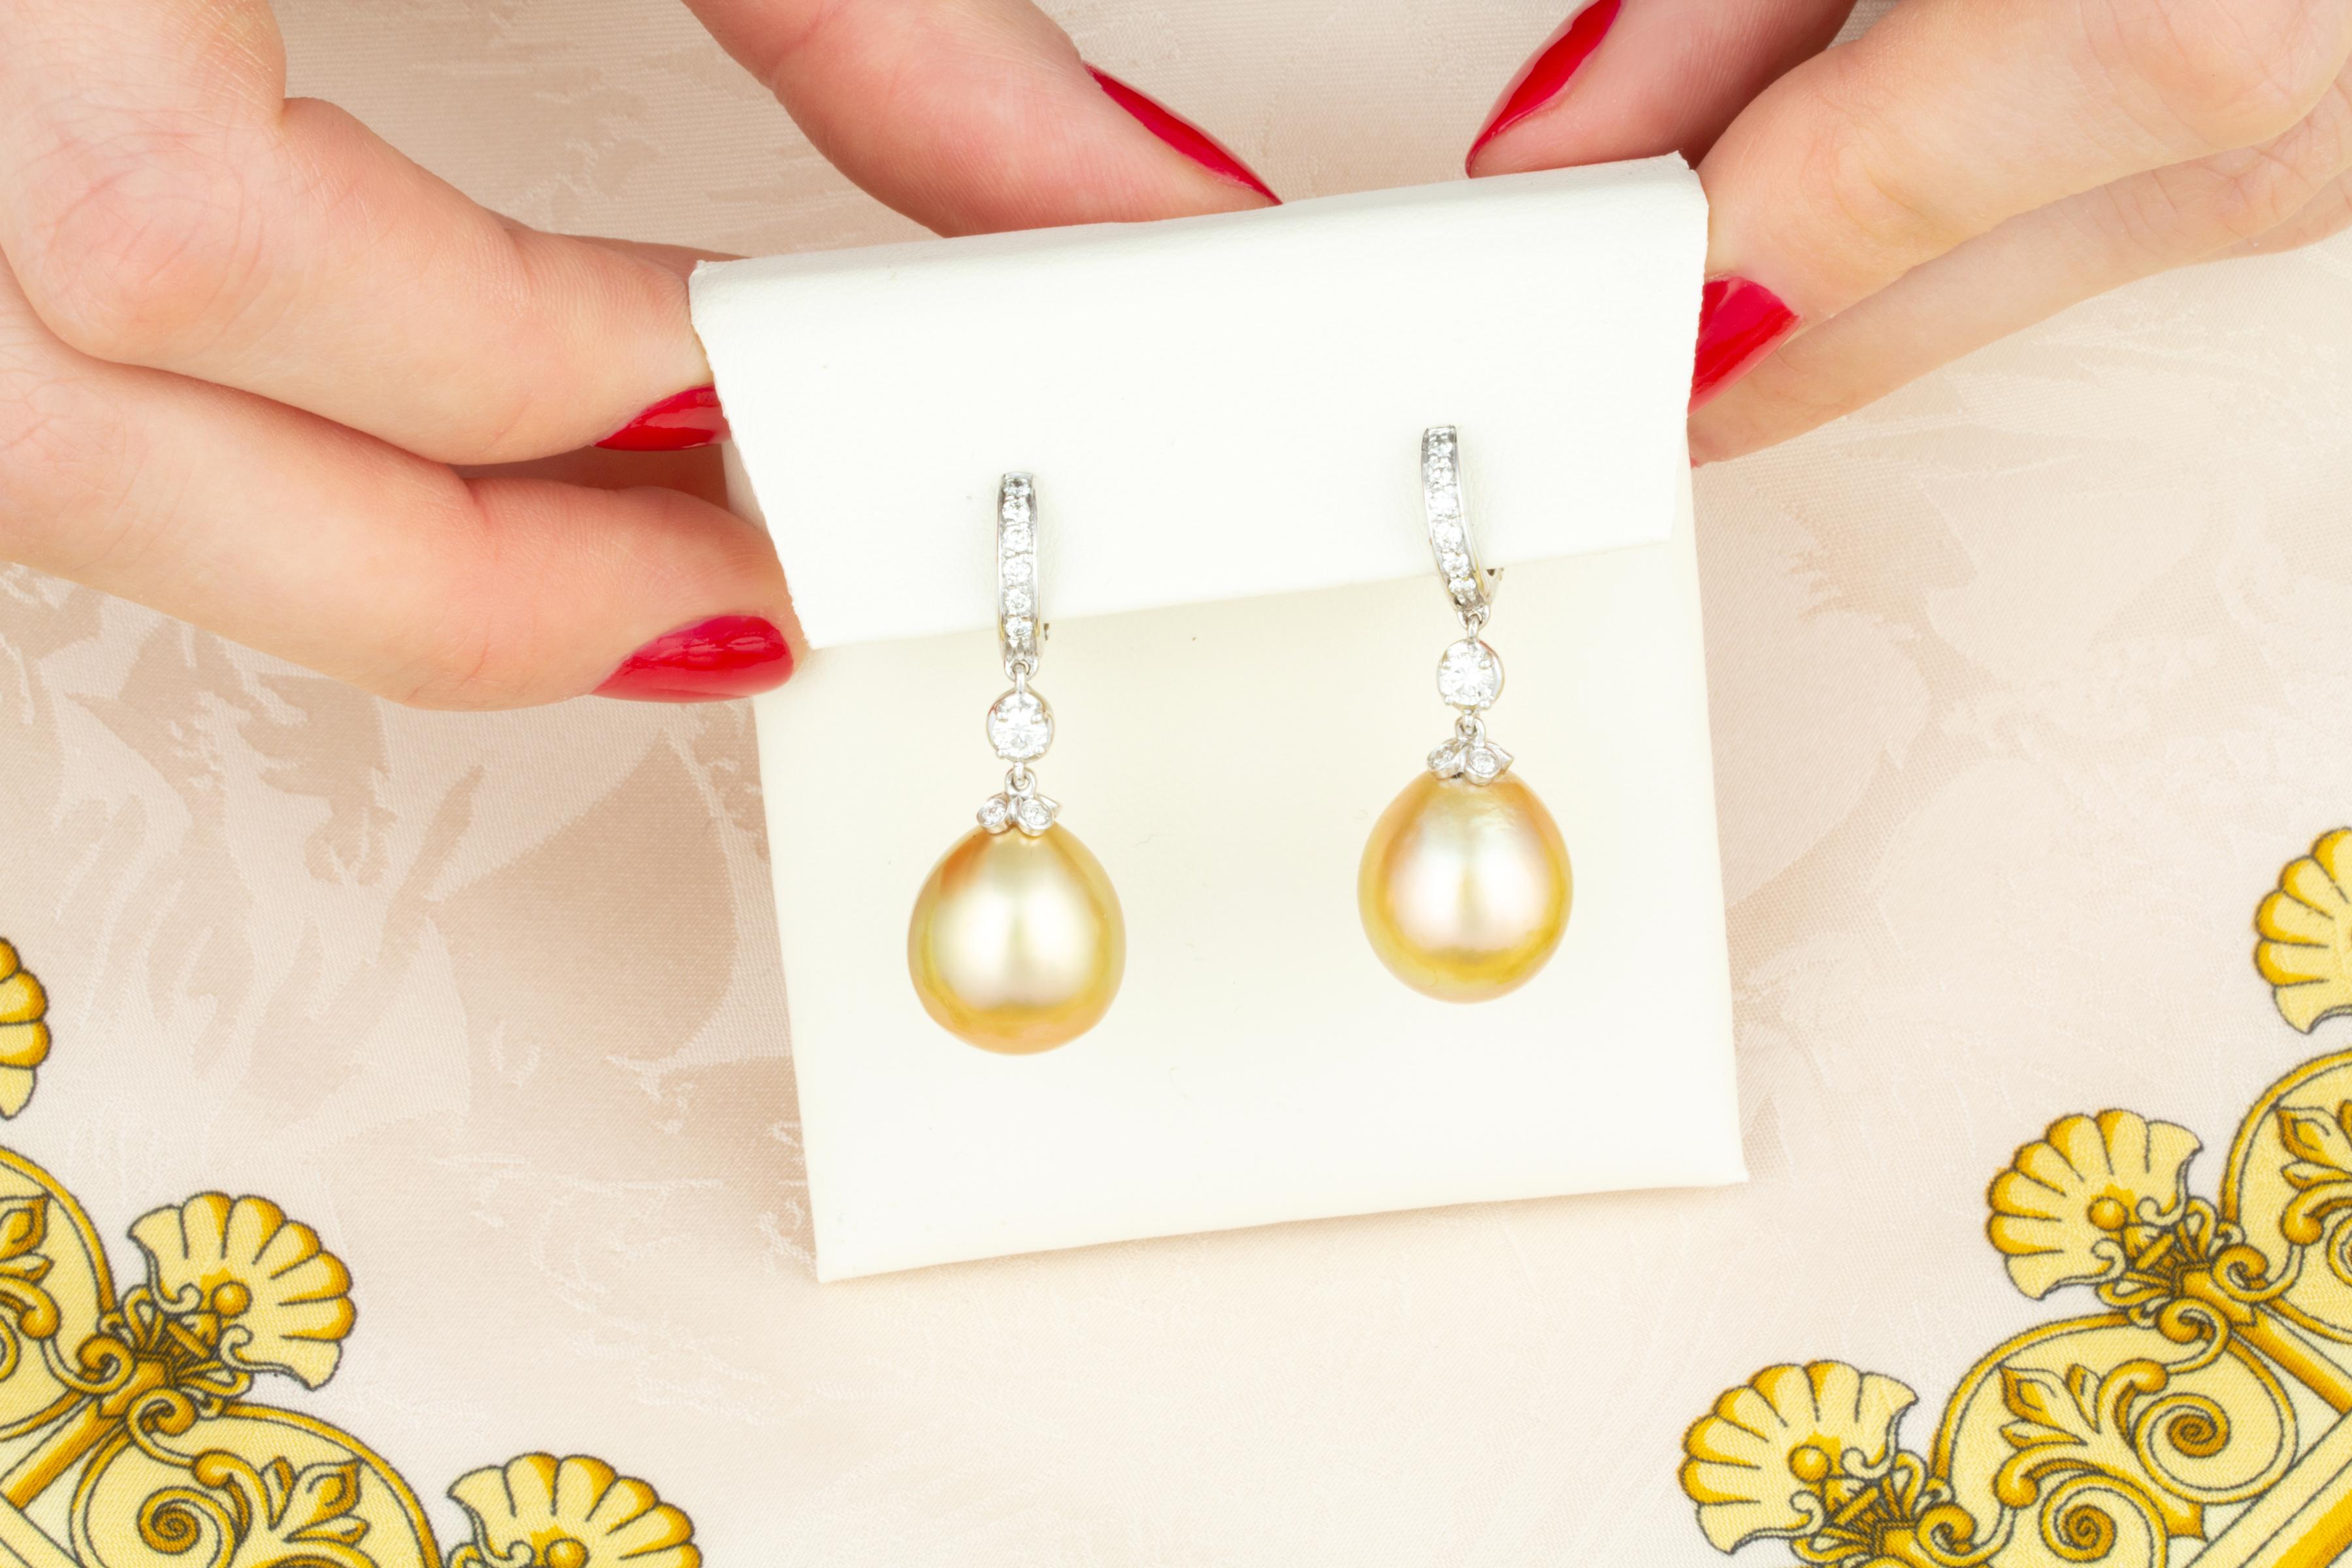 The golden pearl and diamond drop earrings feature two 15 x 13 mm pearls of fine quality nacre, beautiful lustre, and intense golden color.
The pearls are suspended from hoops set with round diamonds en pavé via two larger diamonds of 0.12 each. The